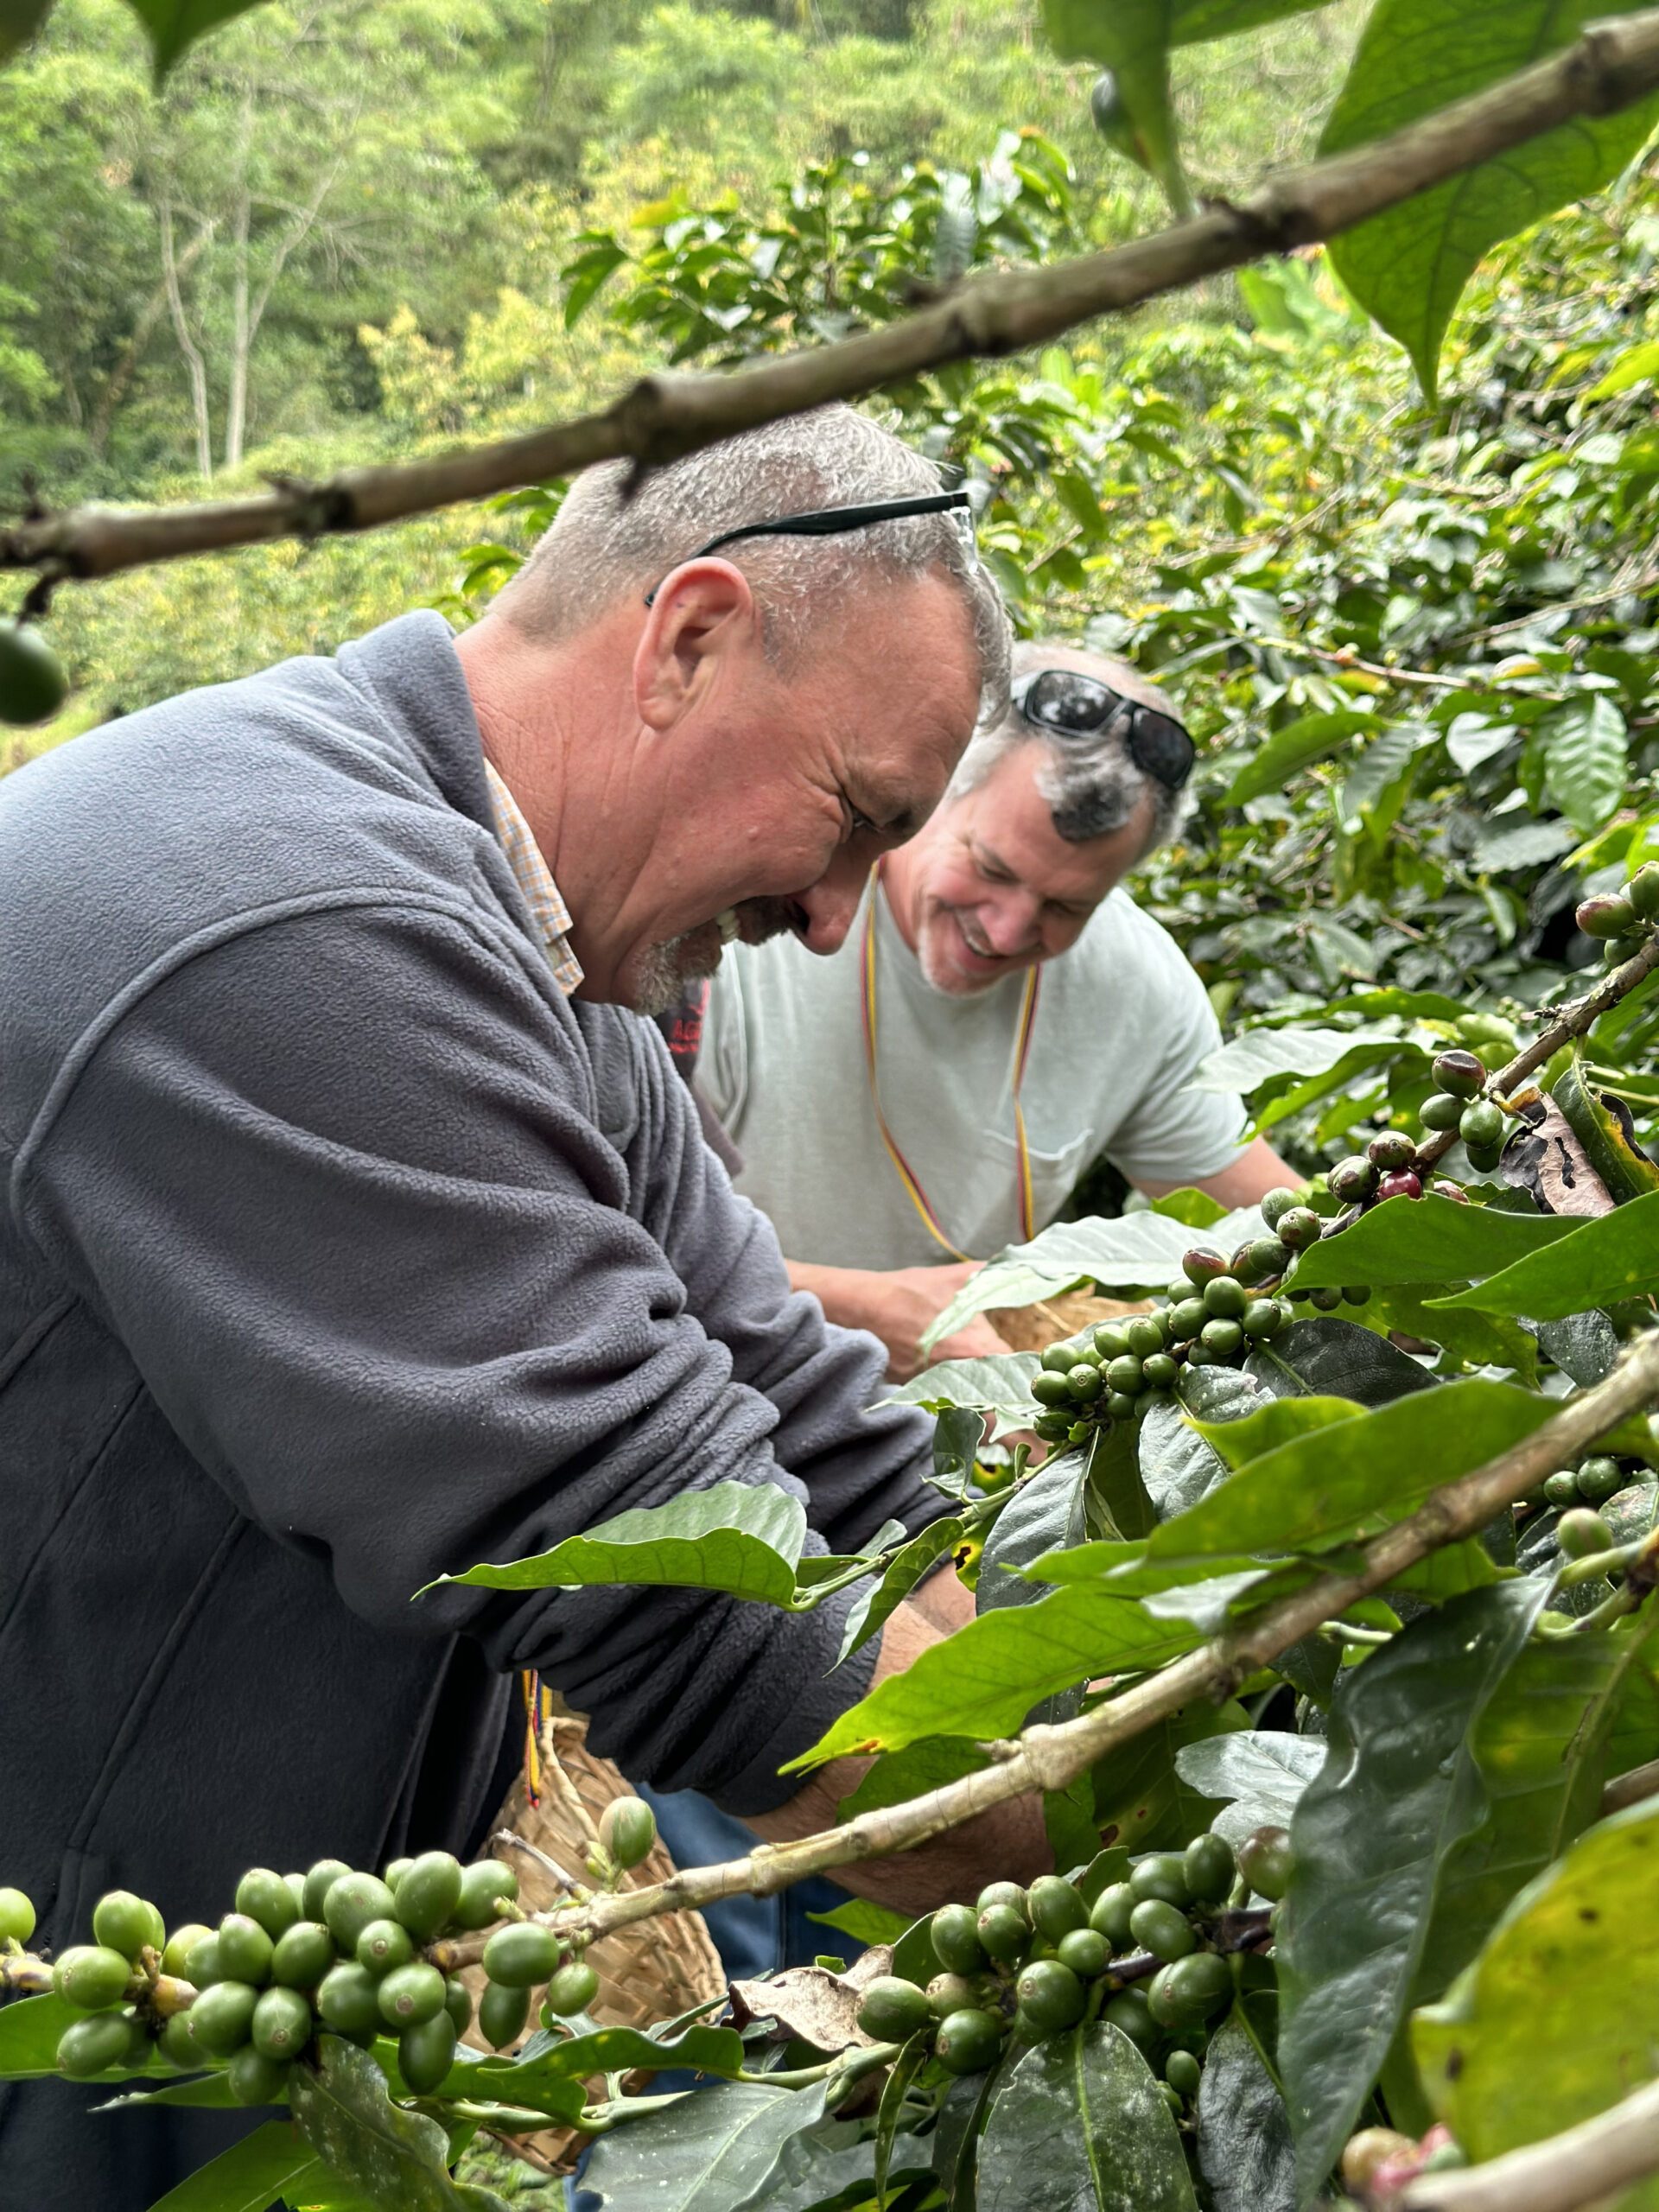 Two men harvest coffee beans from plants in a lush green plantation, showcasing one of the fascinating things to do in Bogotá.